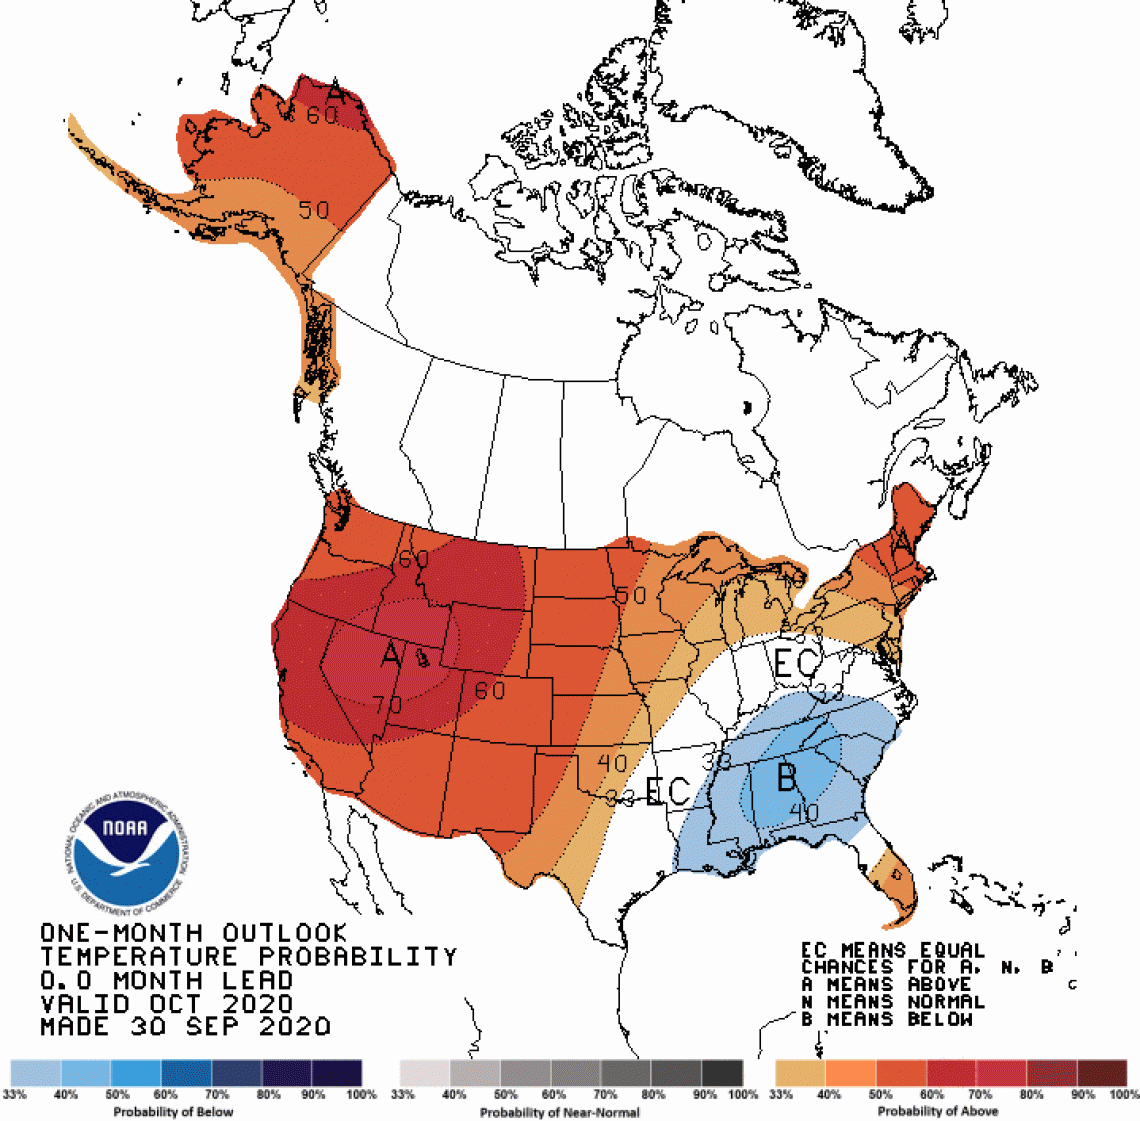 2020 October temperature outlook map